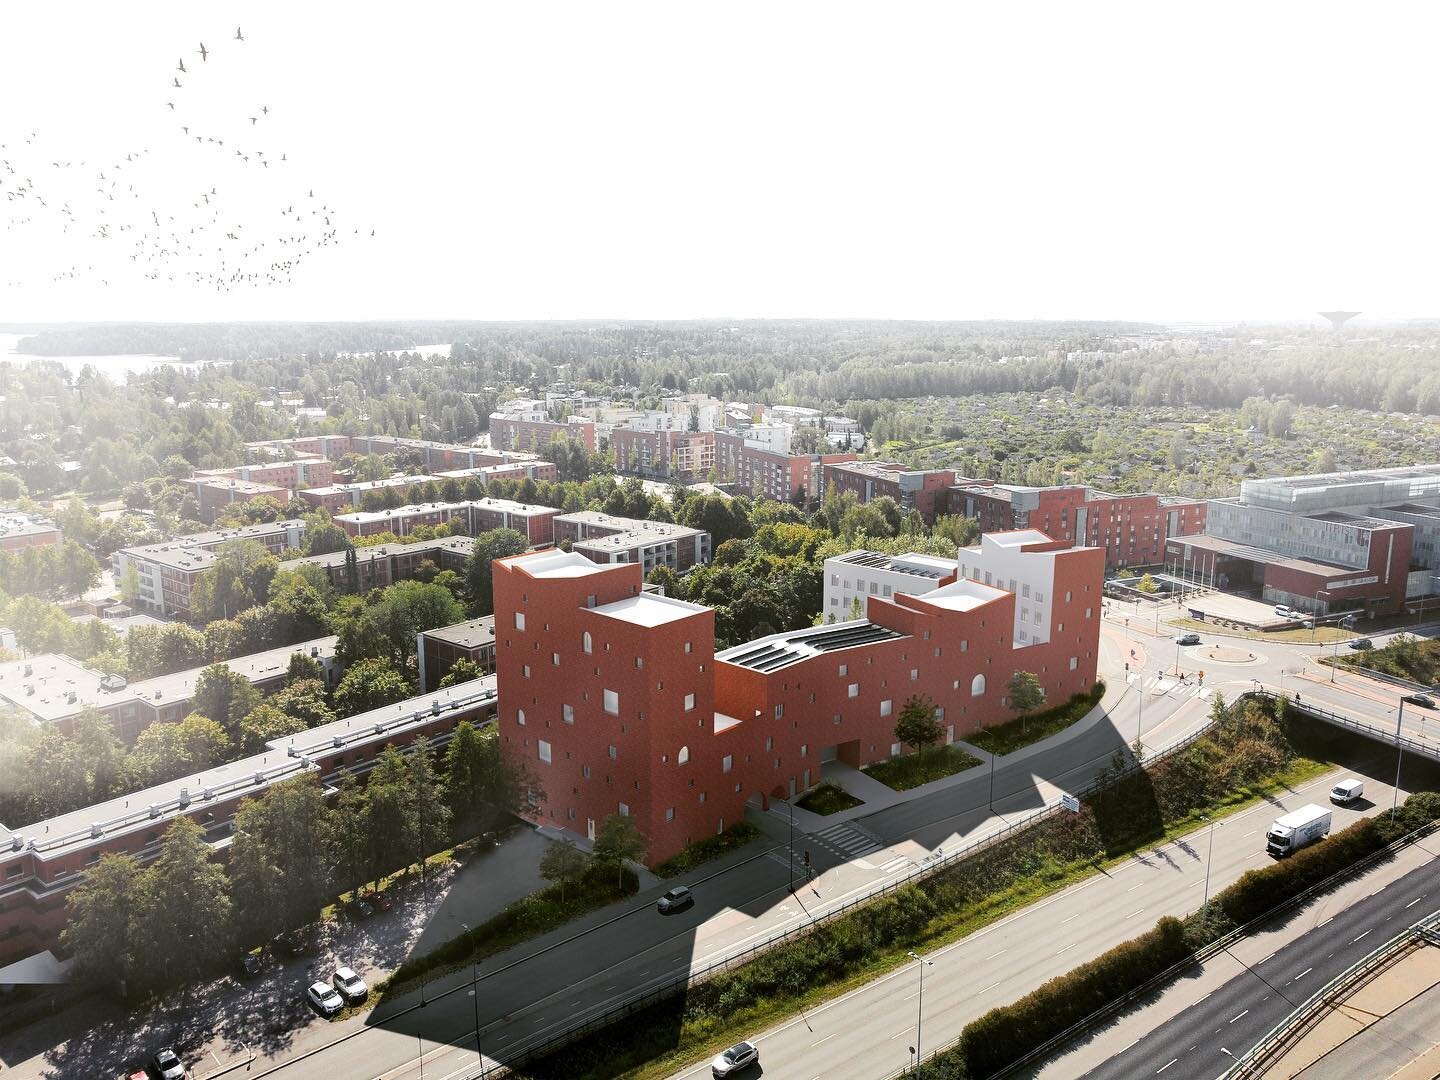 Fantastic building for @hoas_fi &amp; their student tenants! Looking forward to see it built in 2025 By @tienoarkkitehdit 
.
.
.
#buildinginprogress #architecture #archilovers #archidaily #brick #studenthousing #architecturedose #arquitectura #arkite